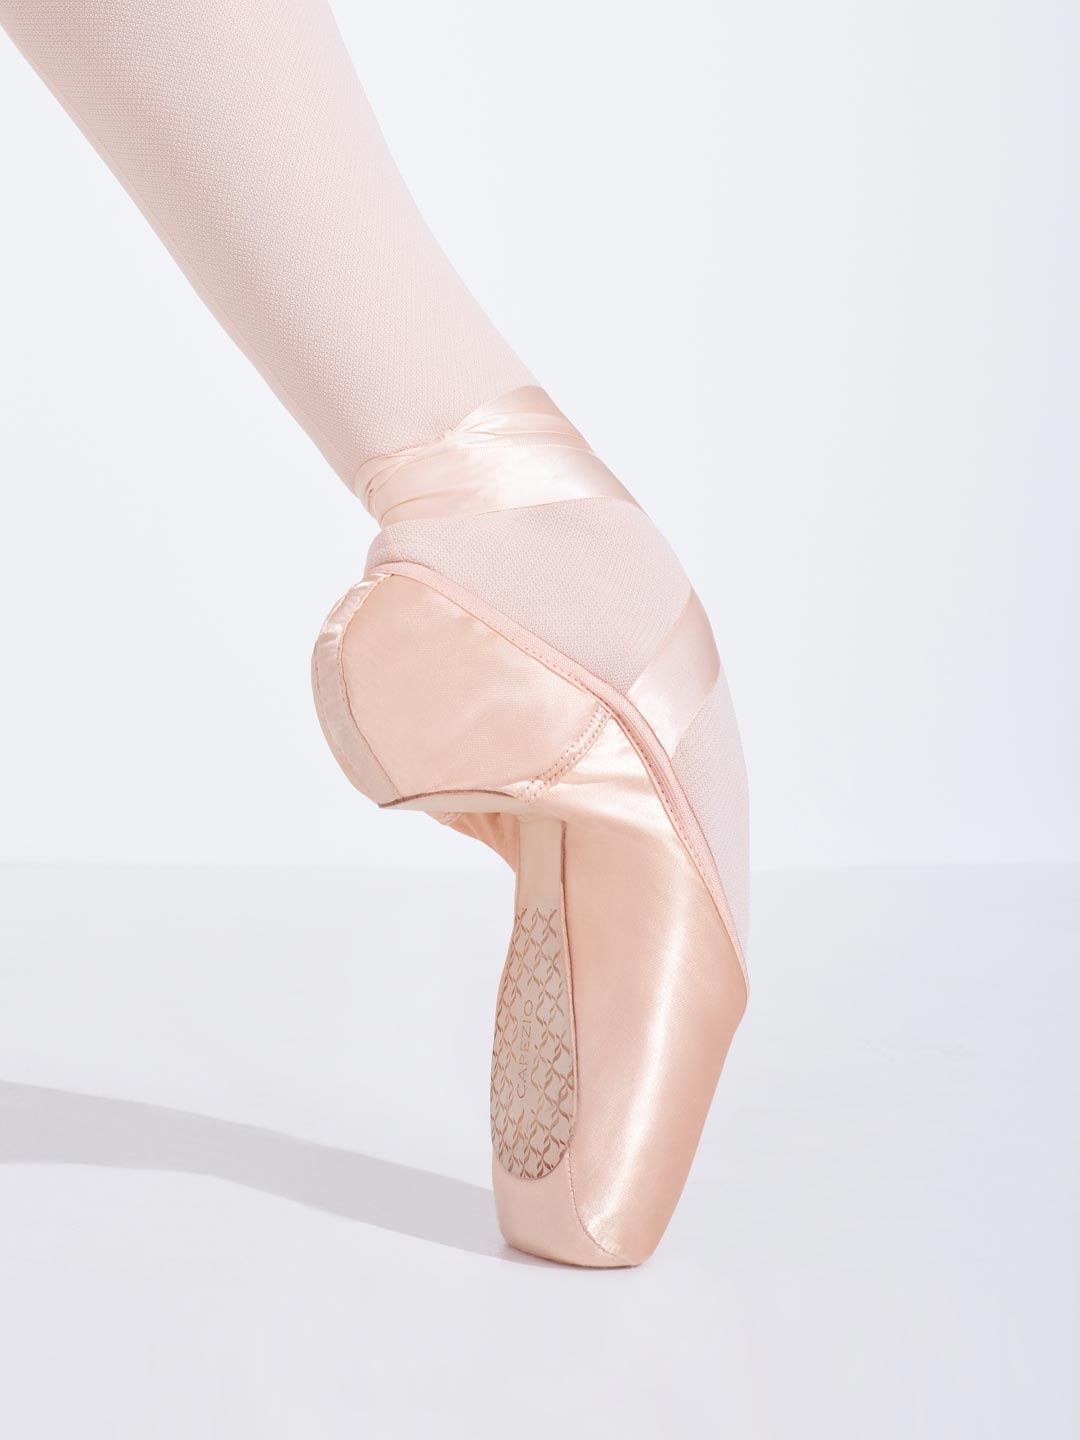 Cambré - 1128W Pointe Shoe with #4 Shank and Broad Toe Box